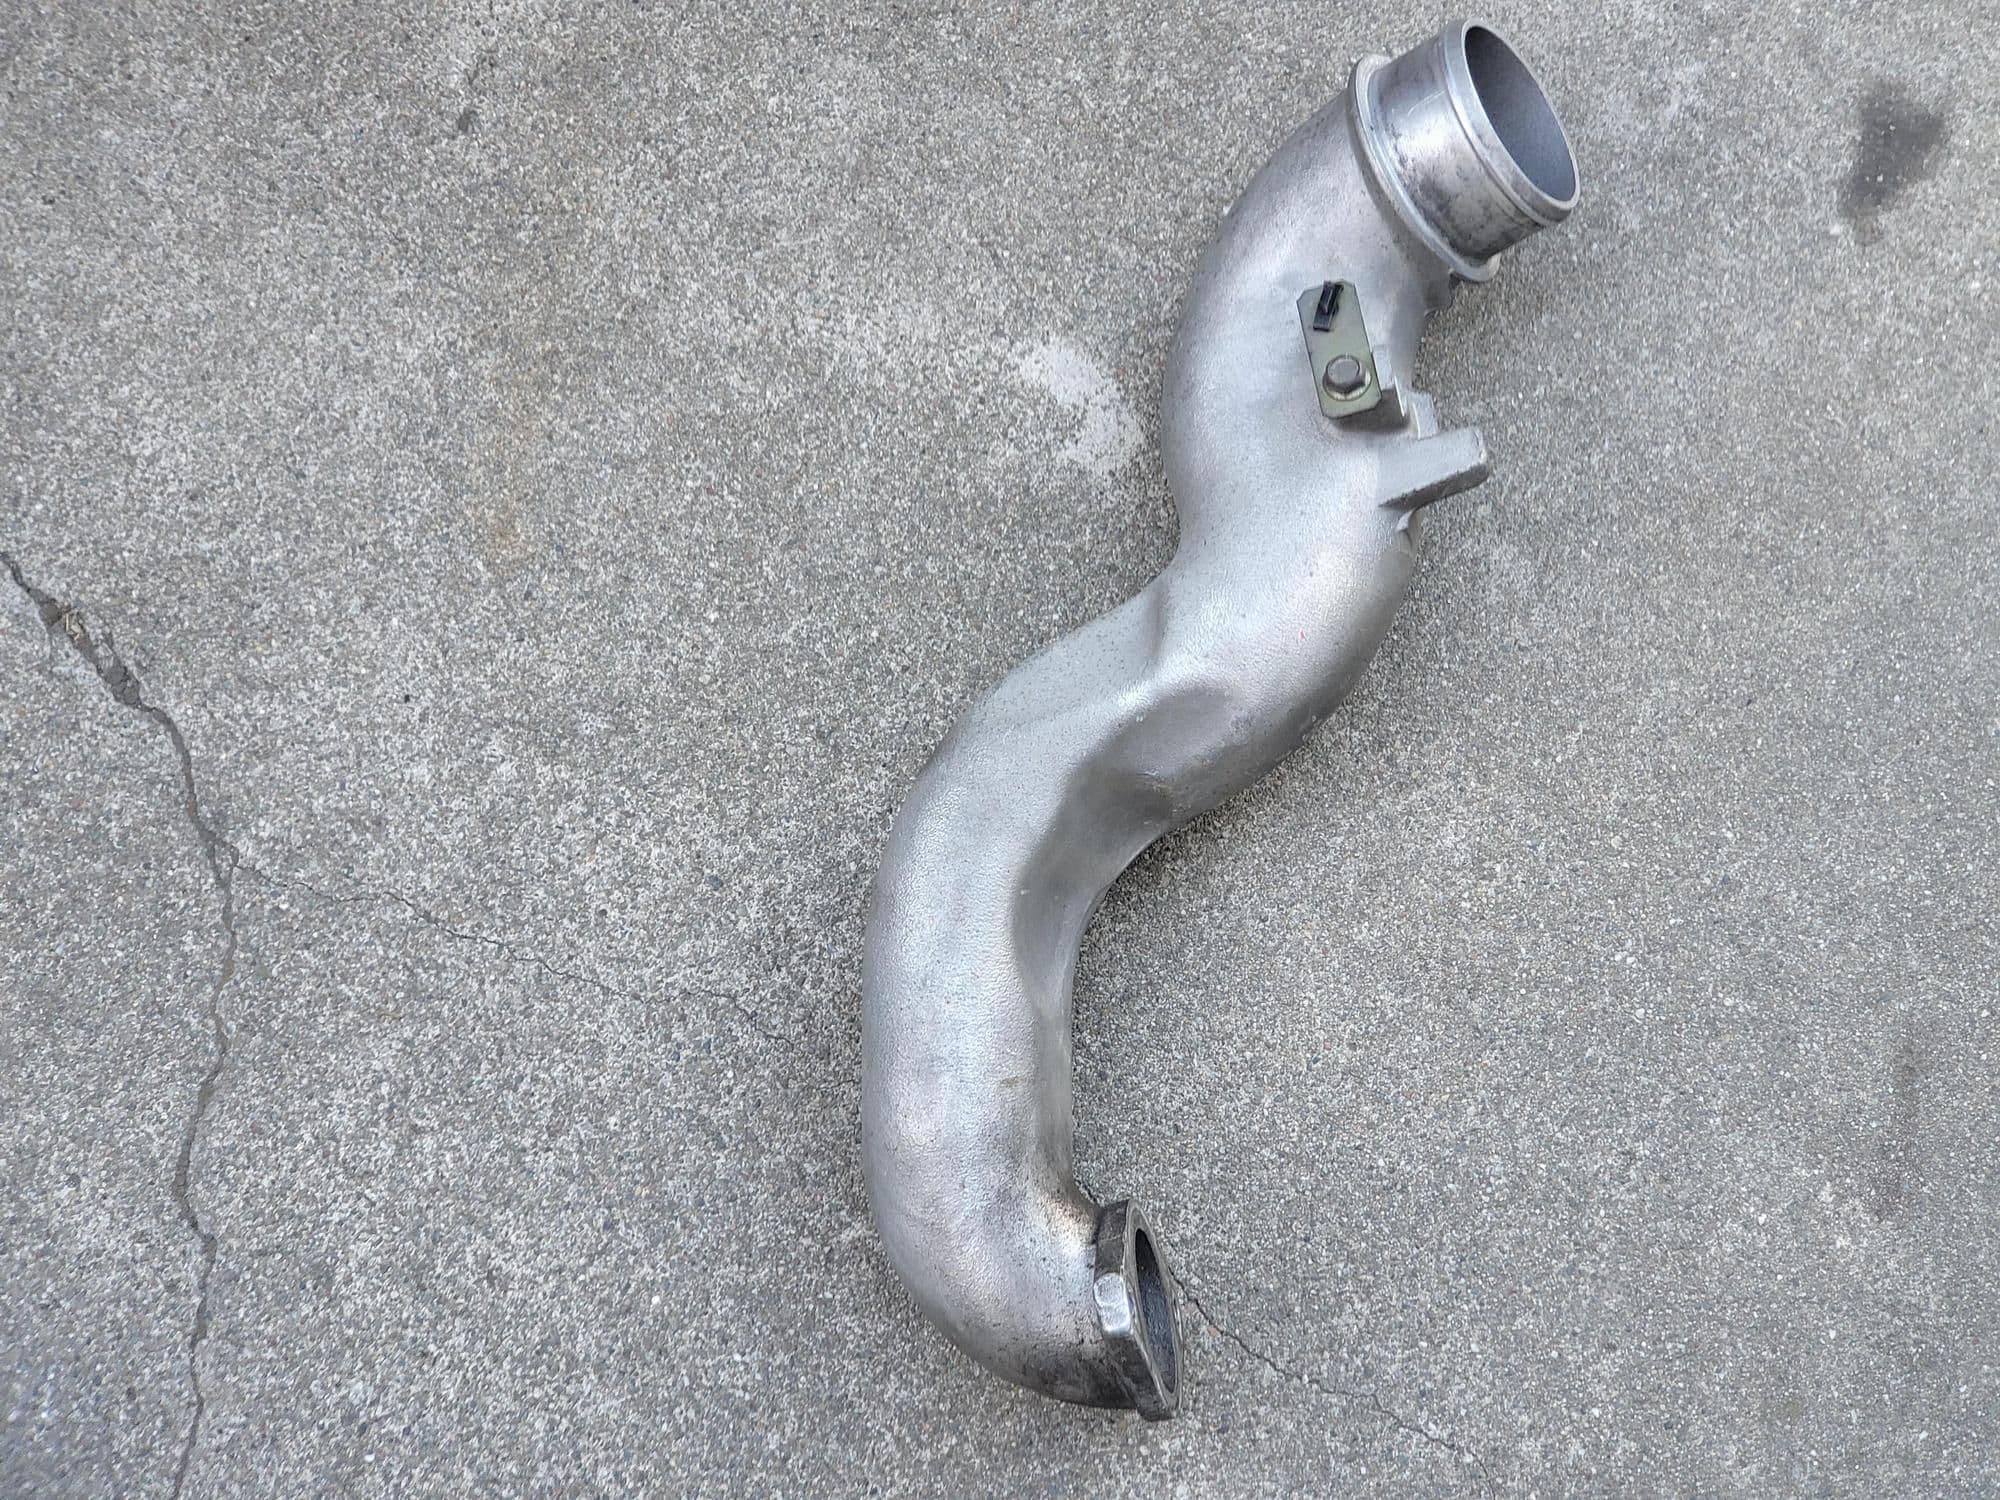 Engine - Intake/Fuel - Efini Y-pipe, aftermarket compression elbow, intake, and more! - Used - 1993 to 2002 Mazda RX-7 - San Mateo, CA 94401, United States